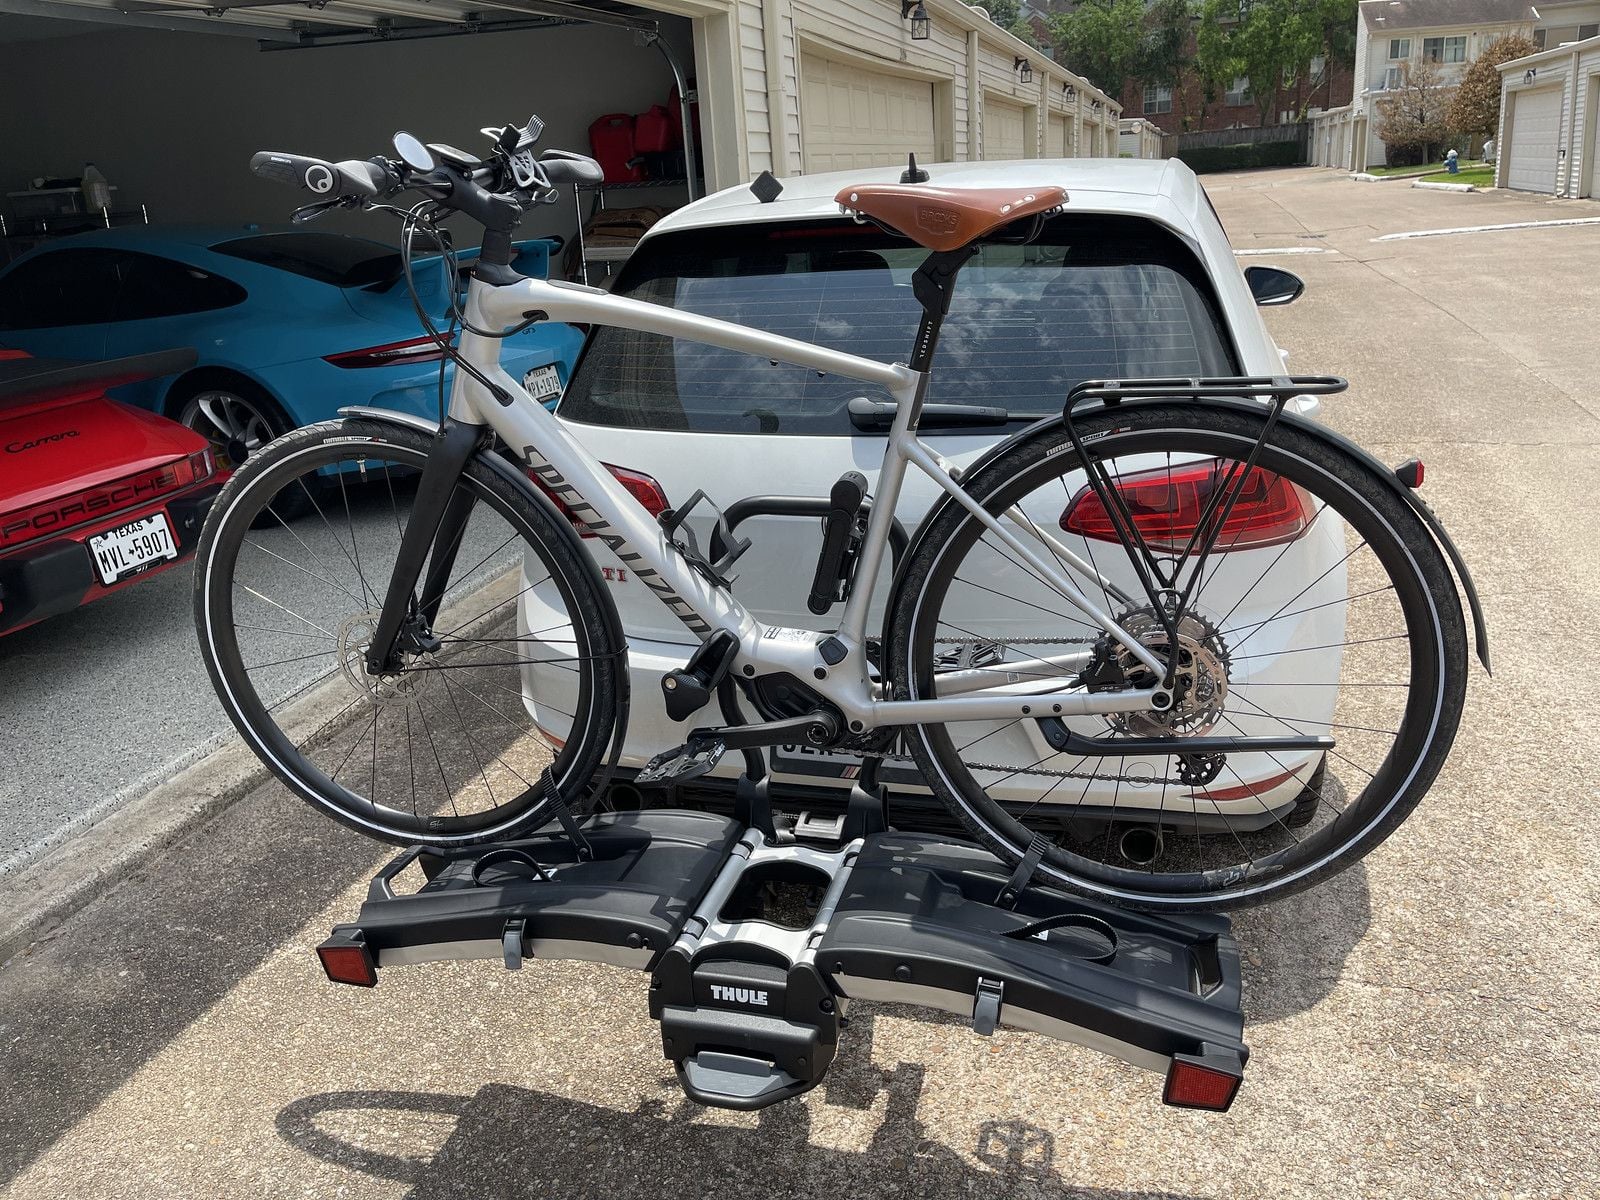 Hitch Rack for E-bike with Fenders - Bike Forums